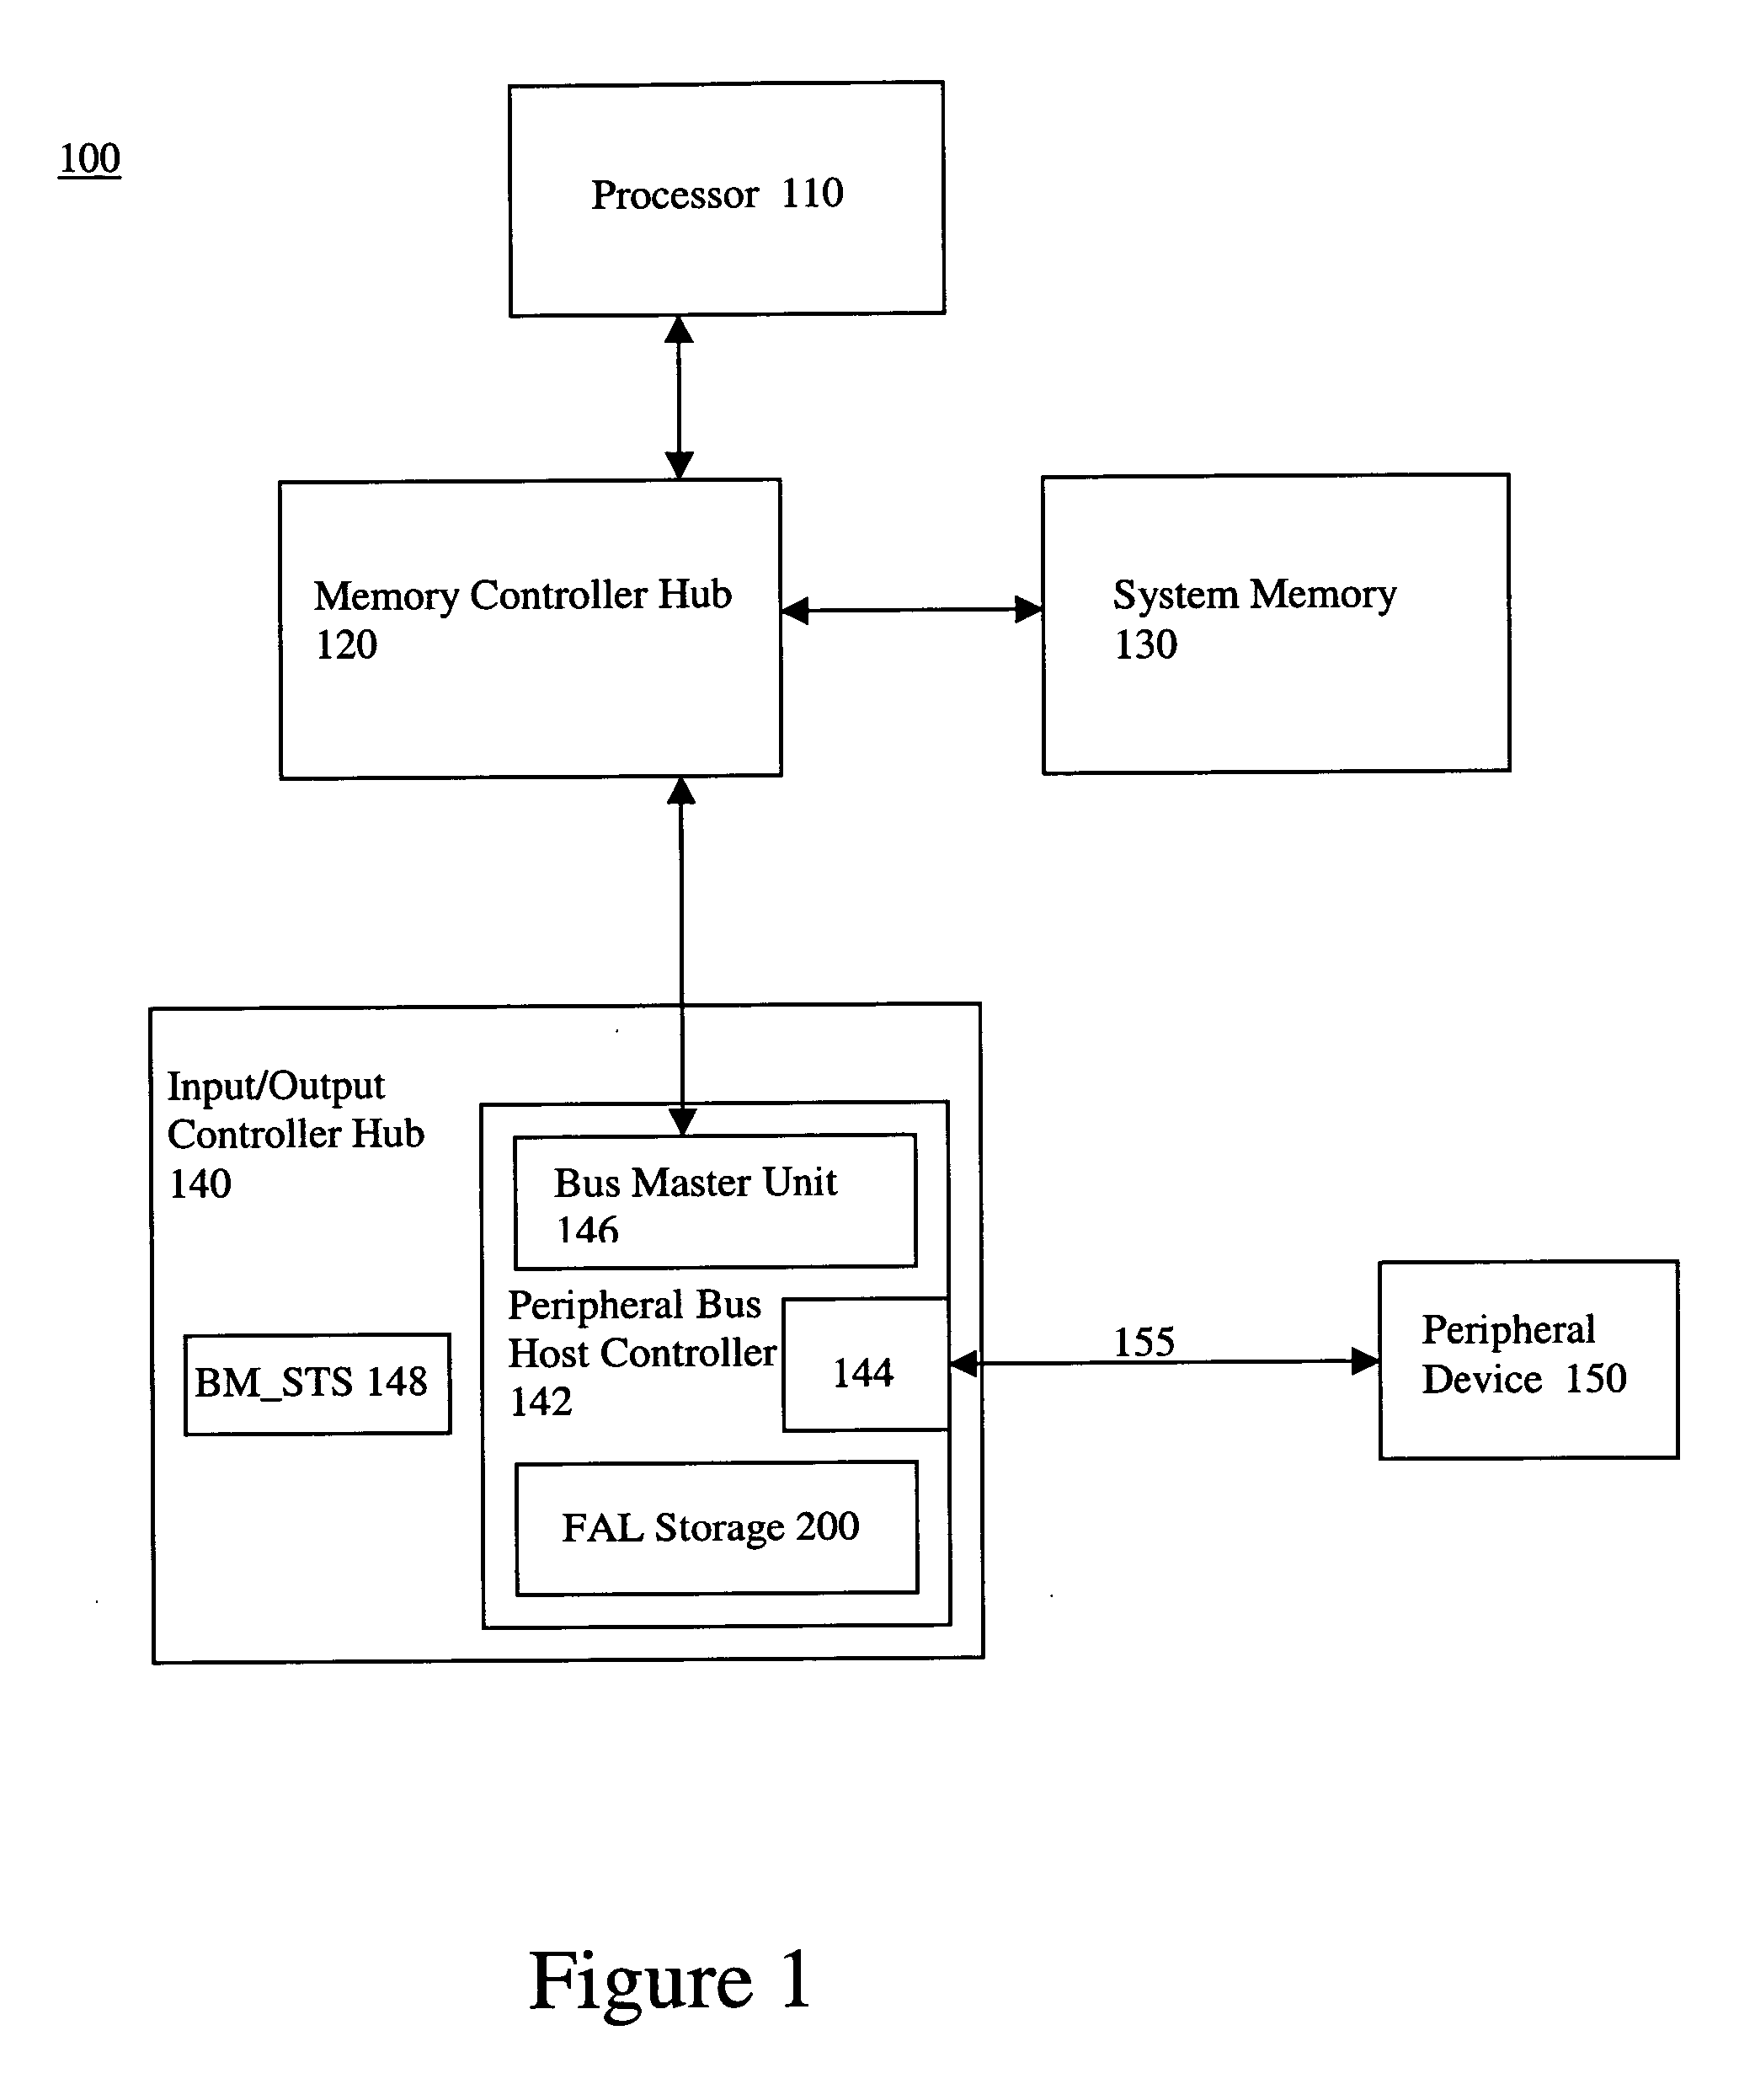 Future activity list for peripheral bus host controller